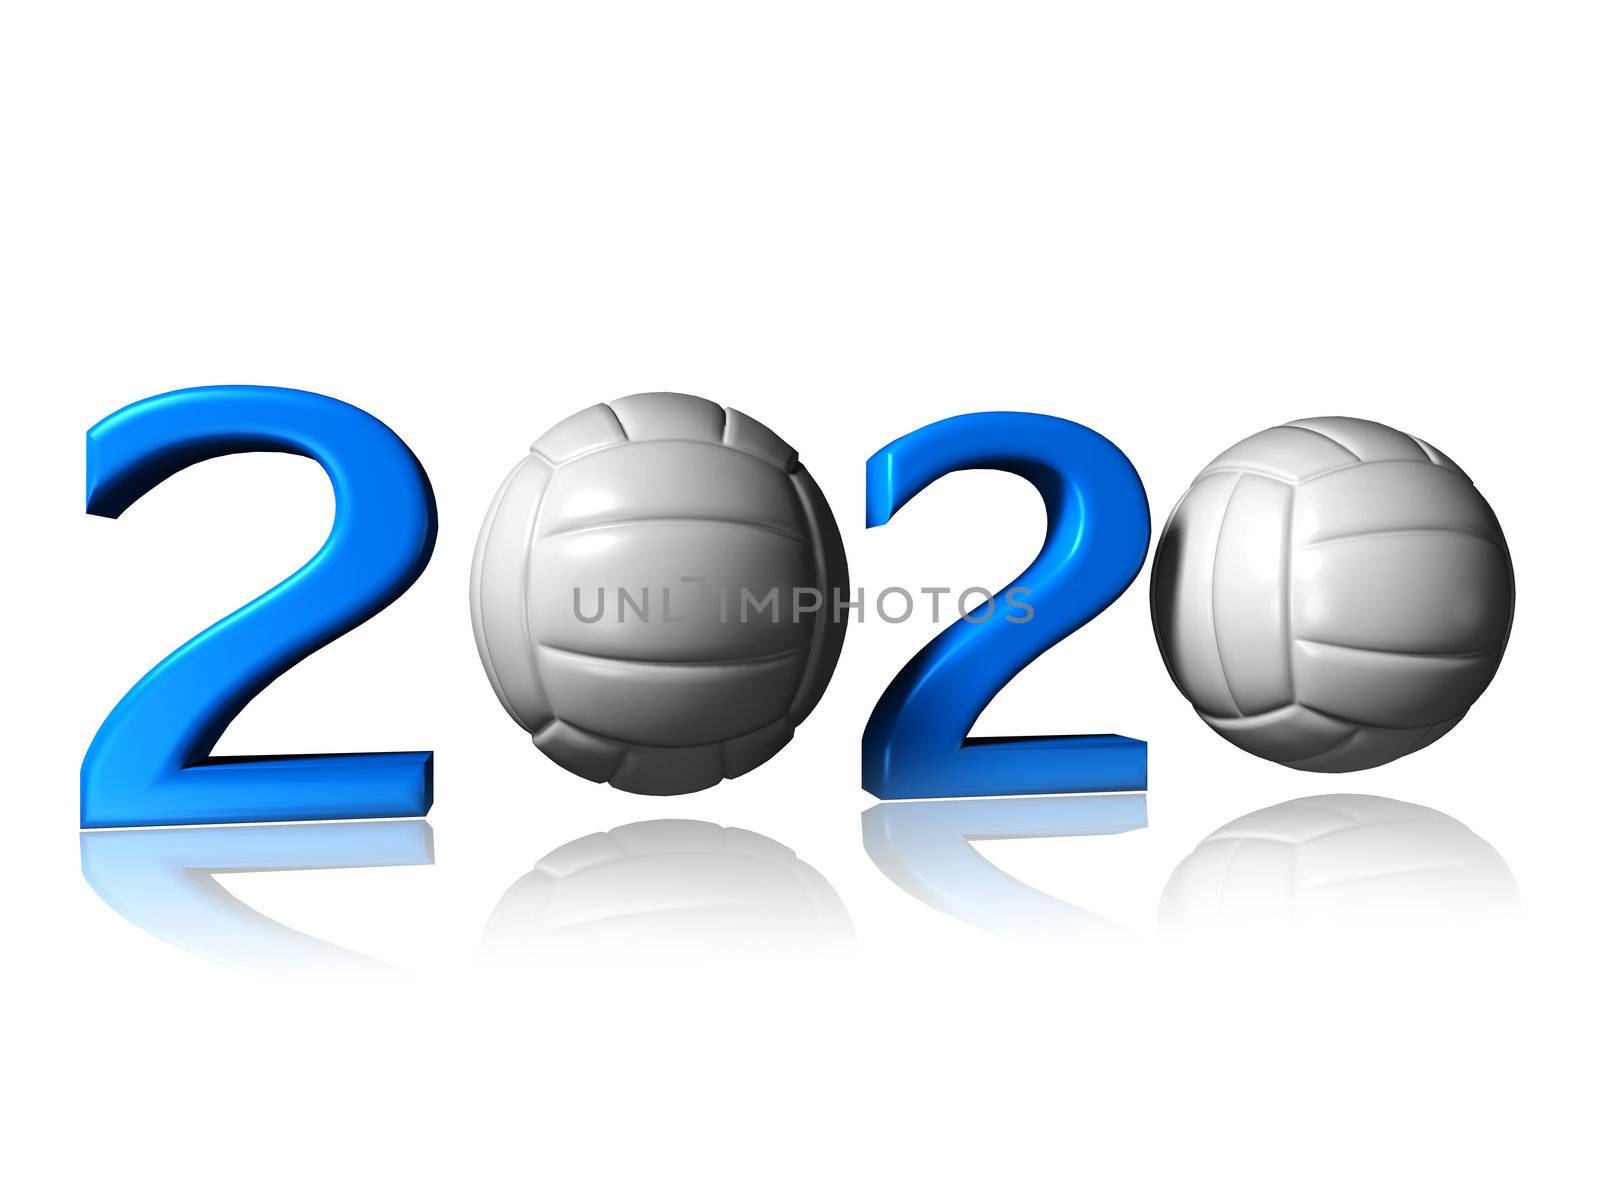 It's a big 2020 volley logo on a white background